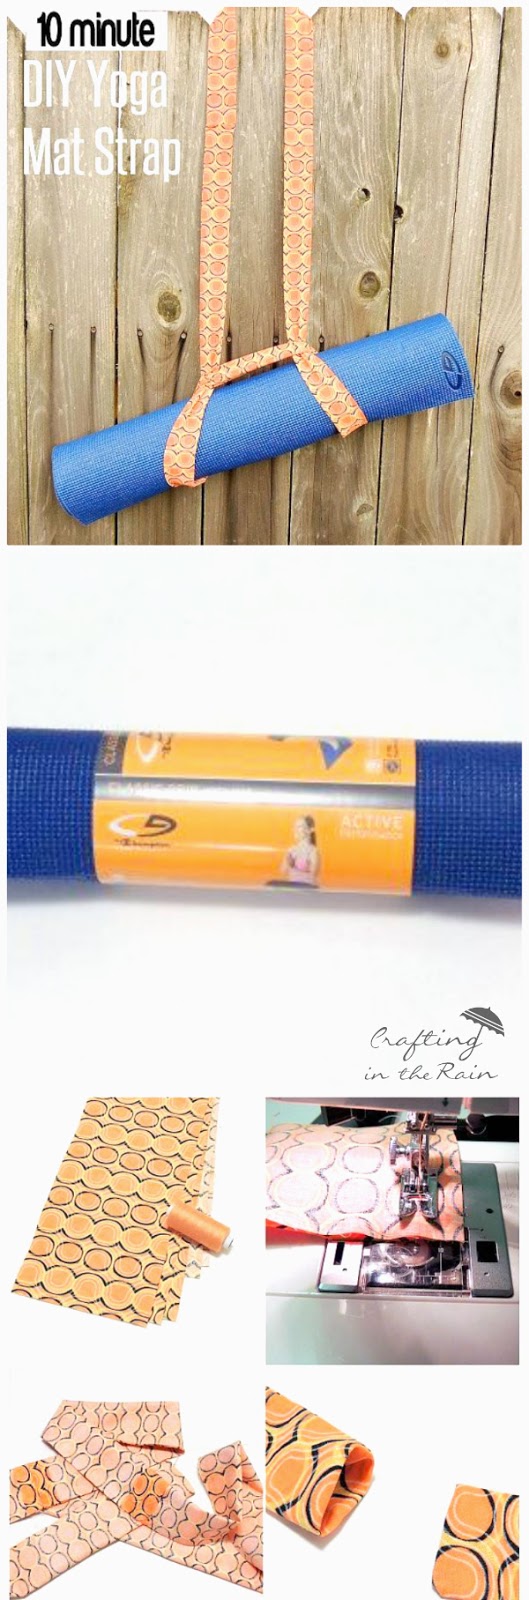 How to sew a yoga mat strap